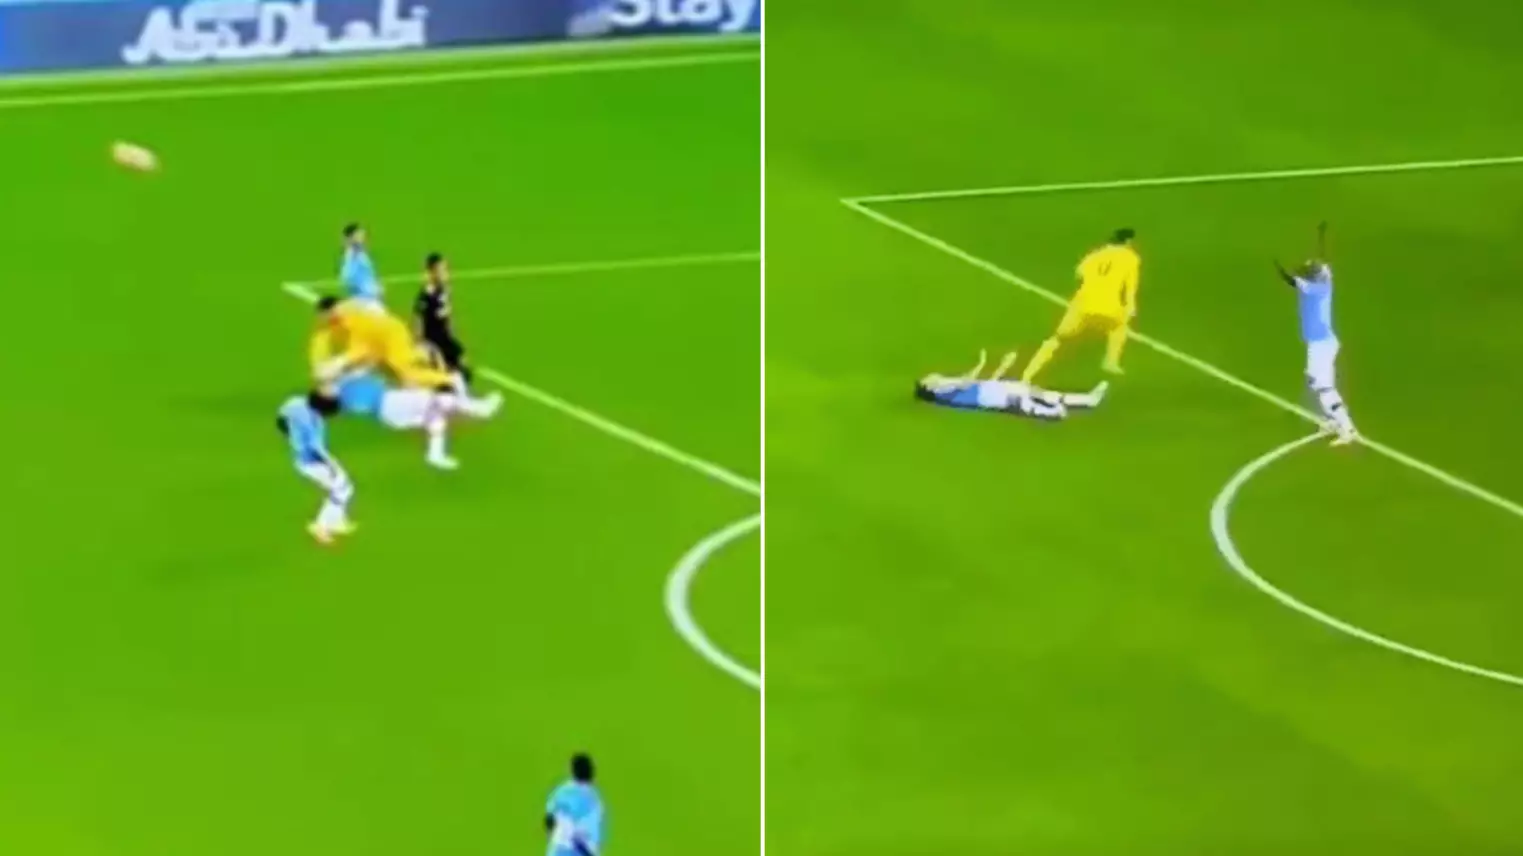 Slow Motion Footage Shows Just How Bad Ederson's Collision With Eric Garcia Was